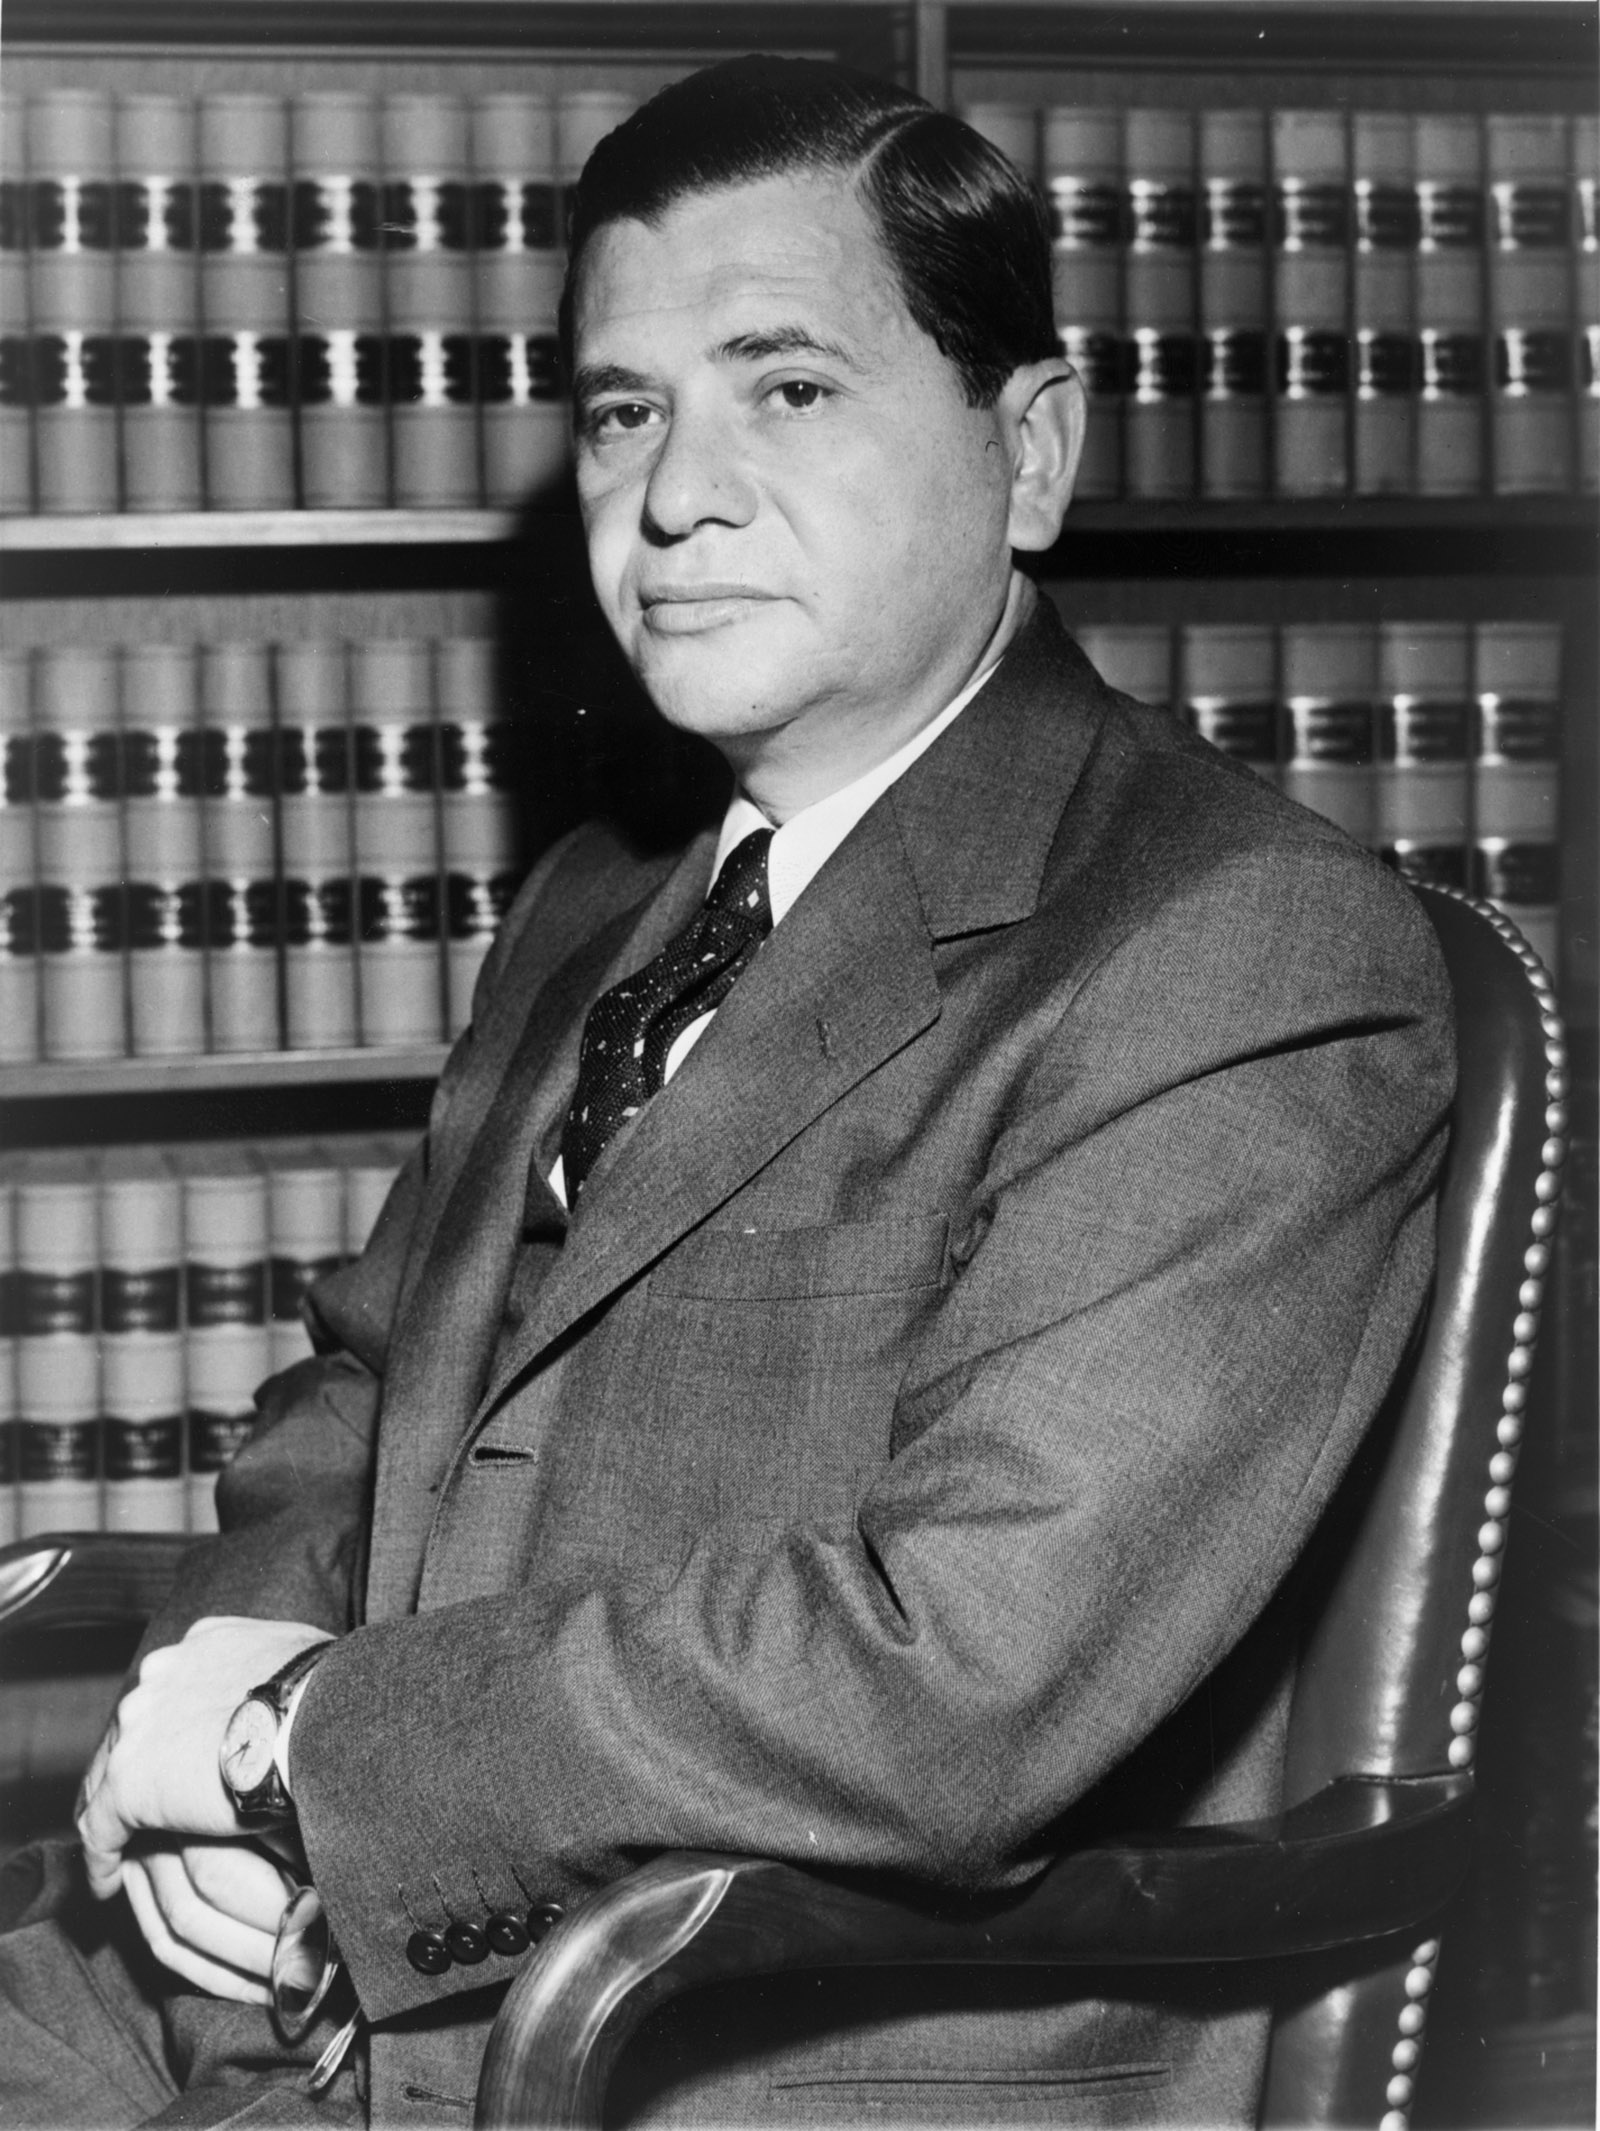 Judge Irving Kaufman after signing the order to execute the Rosenbergs